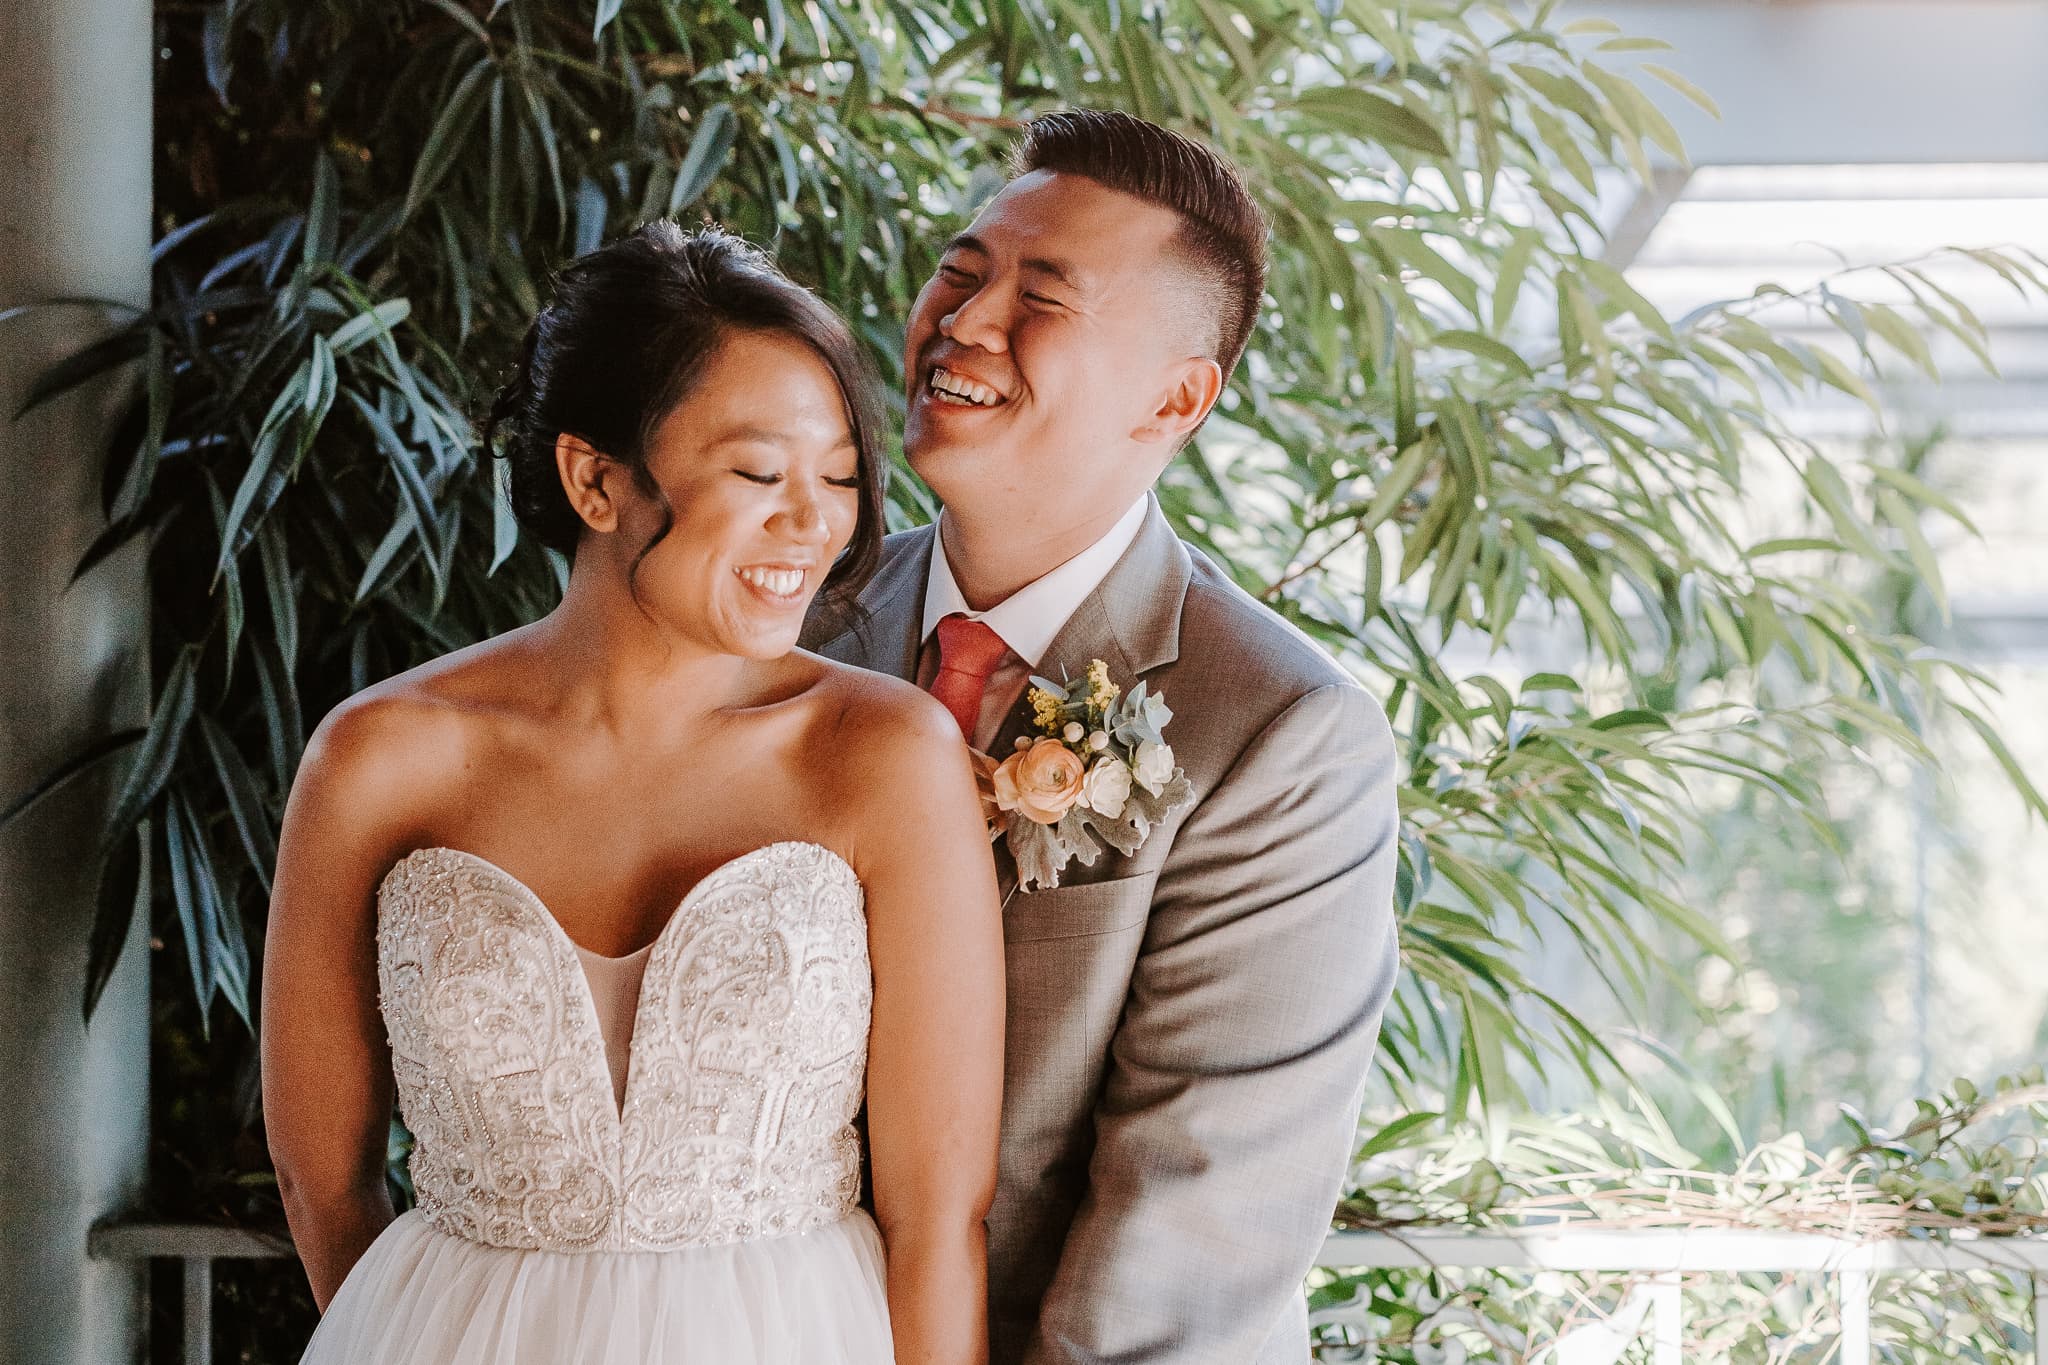 Couple laughing on their wedding day